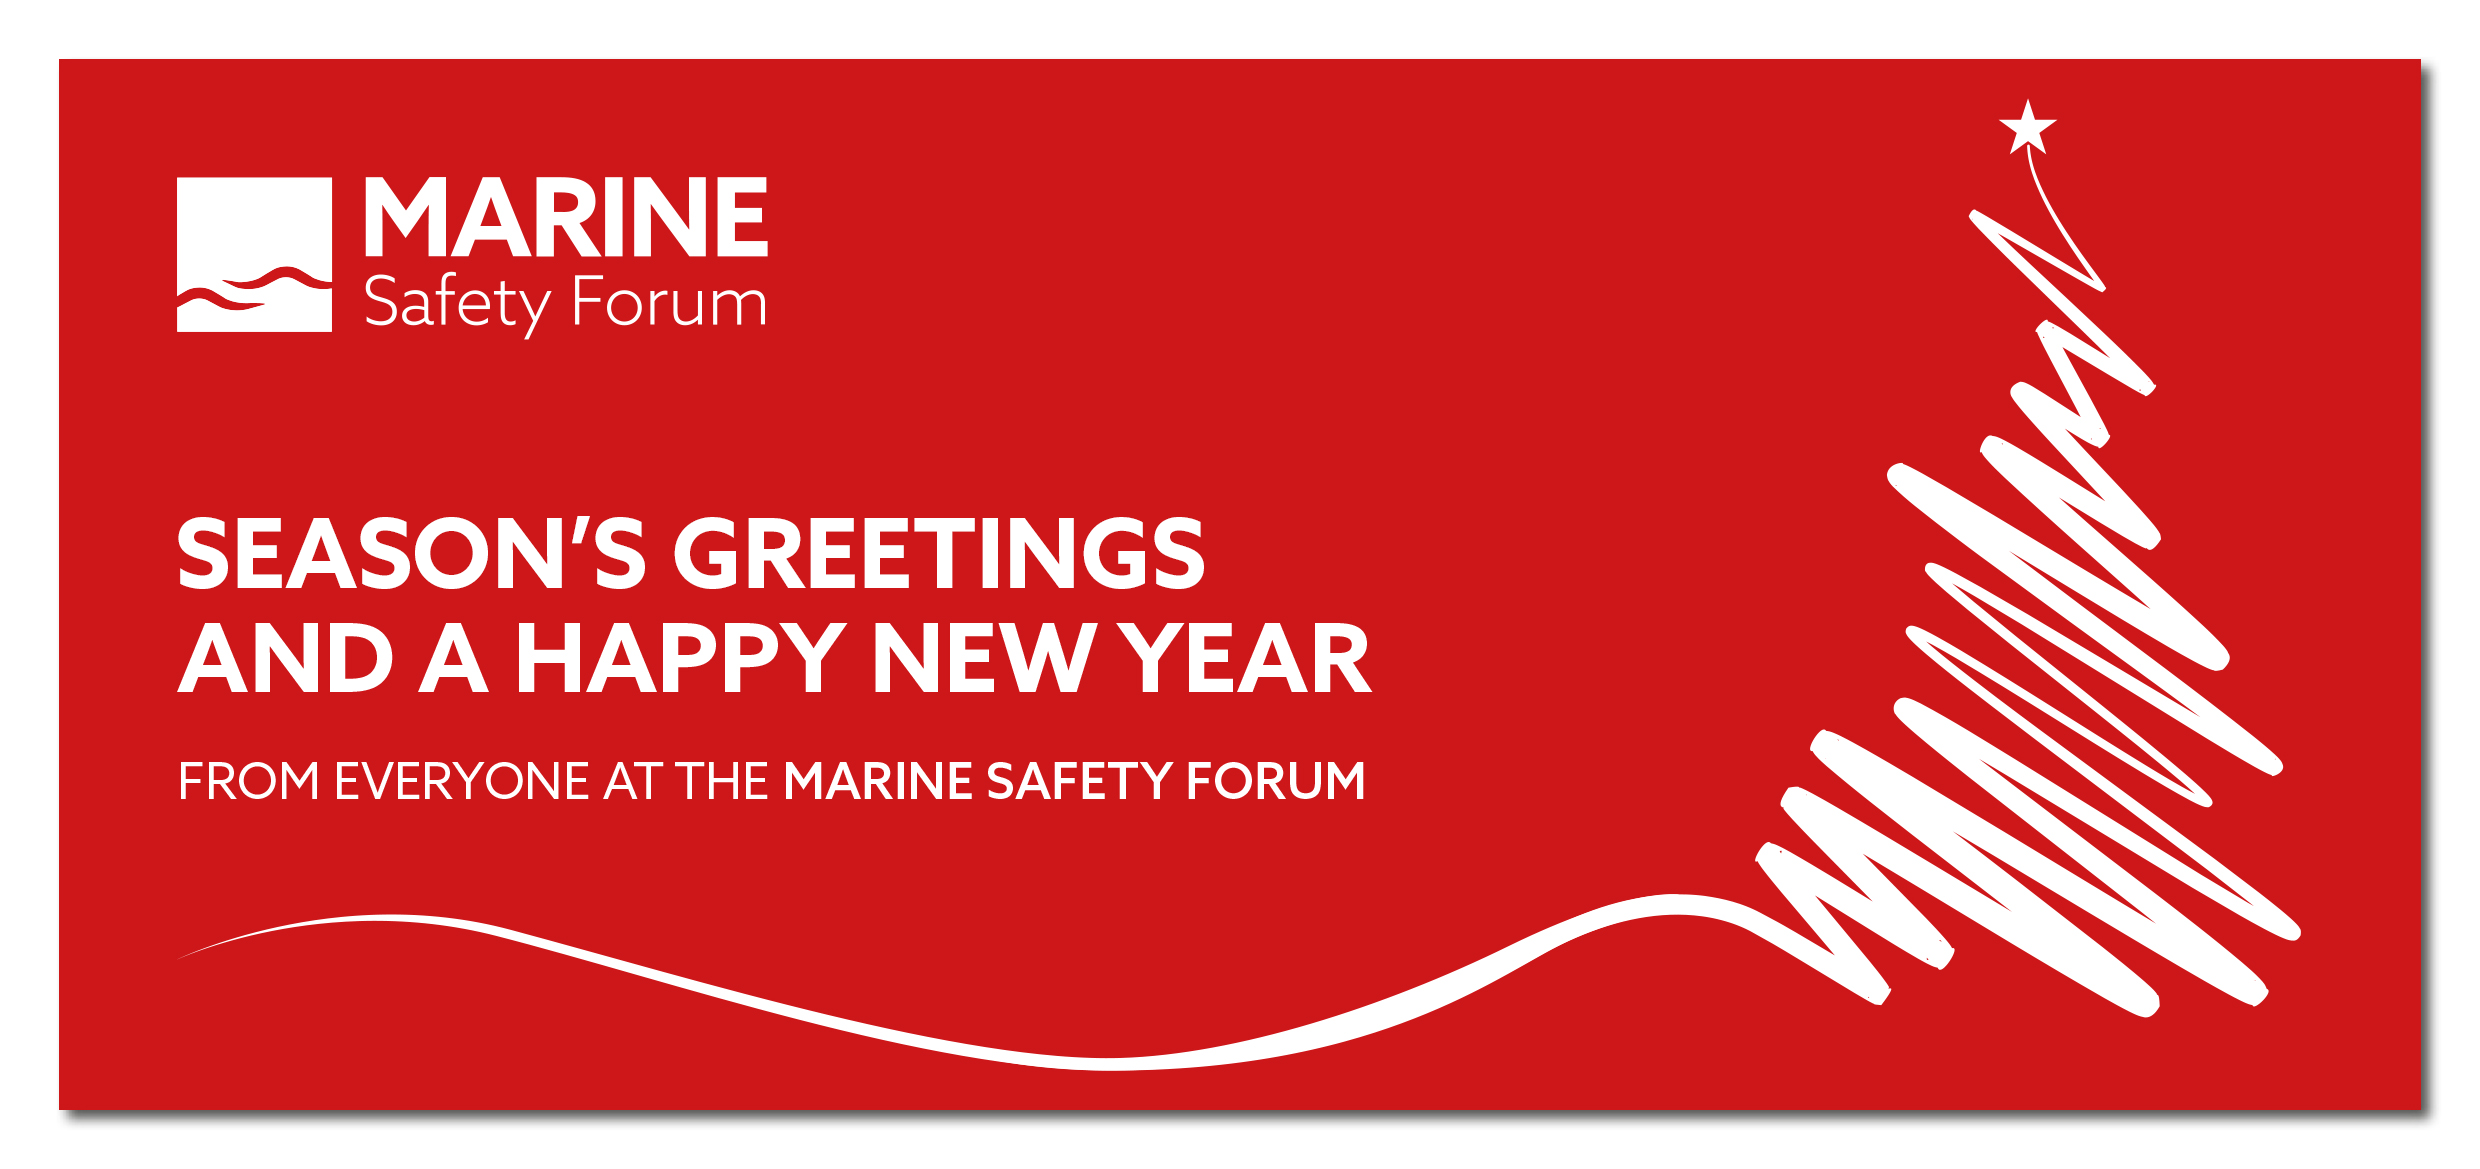 Season’s Greetings and Happy New Year from everyone at the Marine Safety Forum